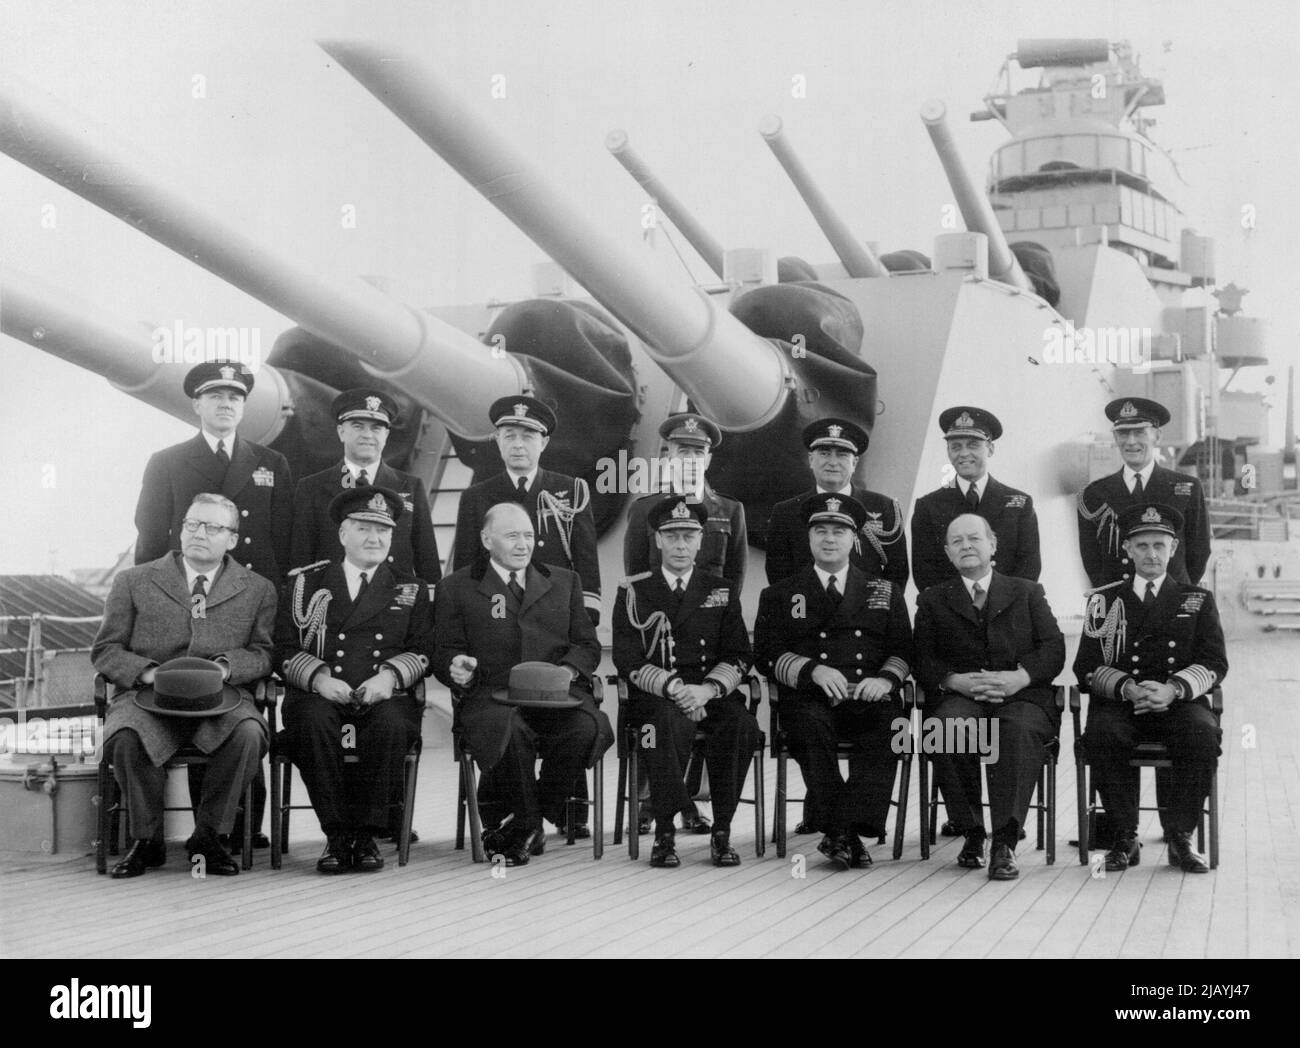 The King Aboard Us Warship: Front row l to r: Minister John W. Kenney (Chief of Mission for Economic Co-operation): First Sea Lord, Admiral of the Fleet Lord Fraser; US Ambassador Lewis Douglas; HM the King; Admiral Richard L. Conolly; First Lord of the Admiralty Viscount Hall; Admiral Algernon Willis, C in C Portsmouth. Standing l to r: Capt. E. R. McLean, captain of the Columbus; Rear Admiral Belger, U.S. Joint Planning Staff; Rear Admiral D.S. Cornwell, US Naval Attache, London; Major General A.M. Harper, Joint Planning Staff; Rear Admiral G.R. Henderson, Chief of Staff to Admiral Conolly; Stock Photo